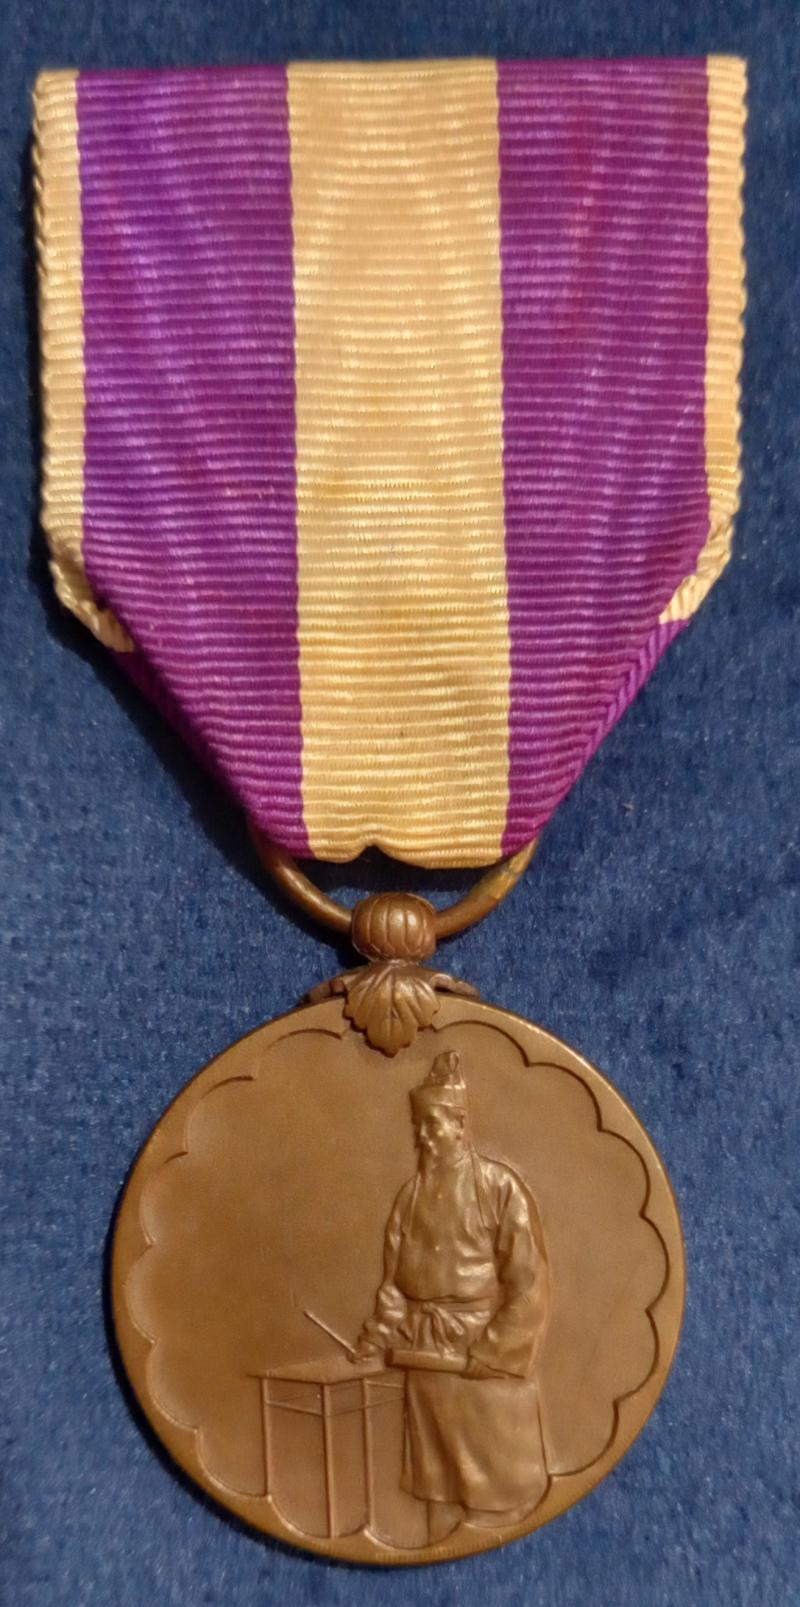 JAPANESE; 1920 FIRST NATIONAL CENSUS MEDAL